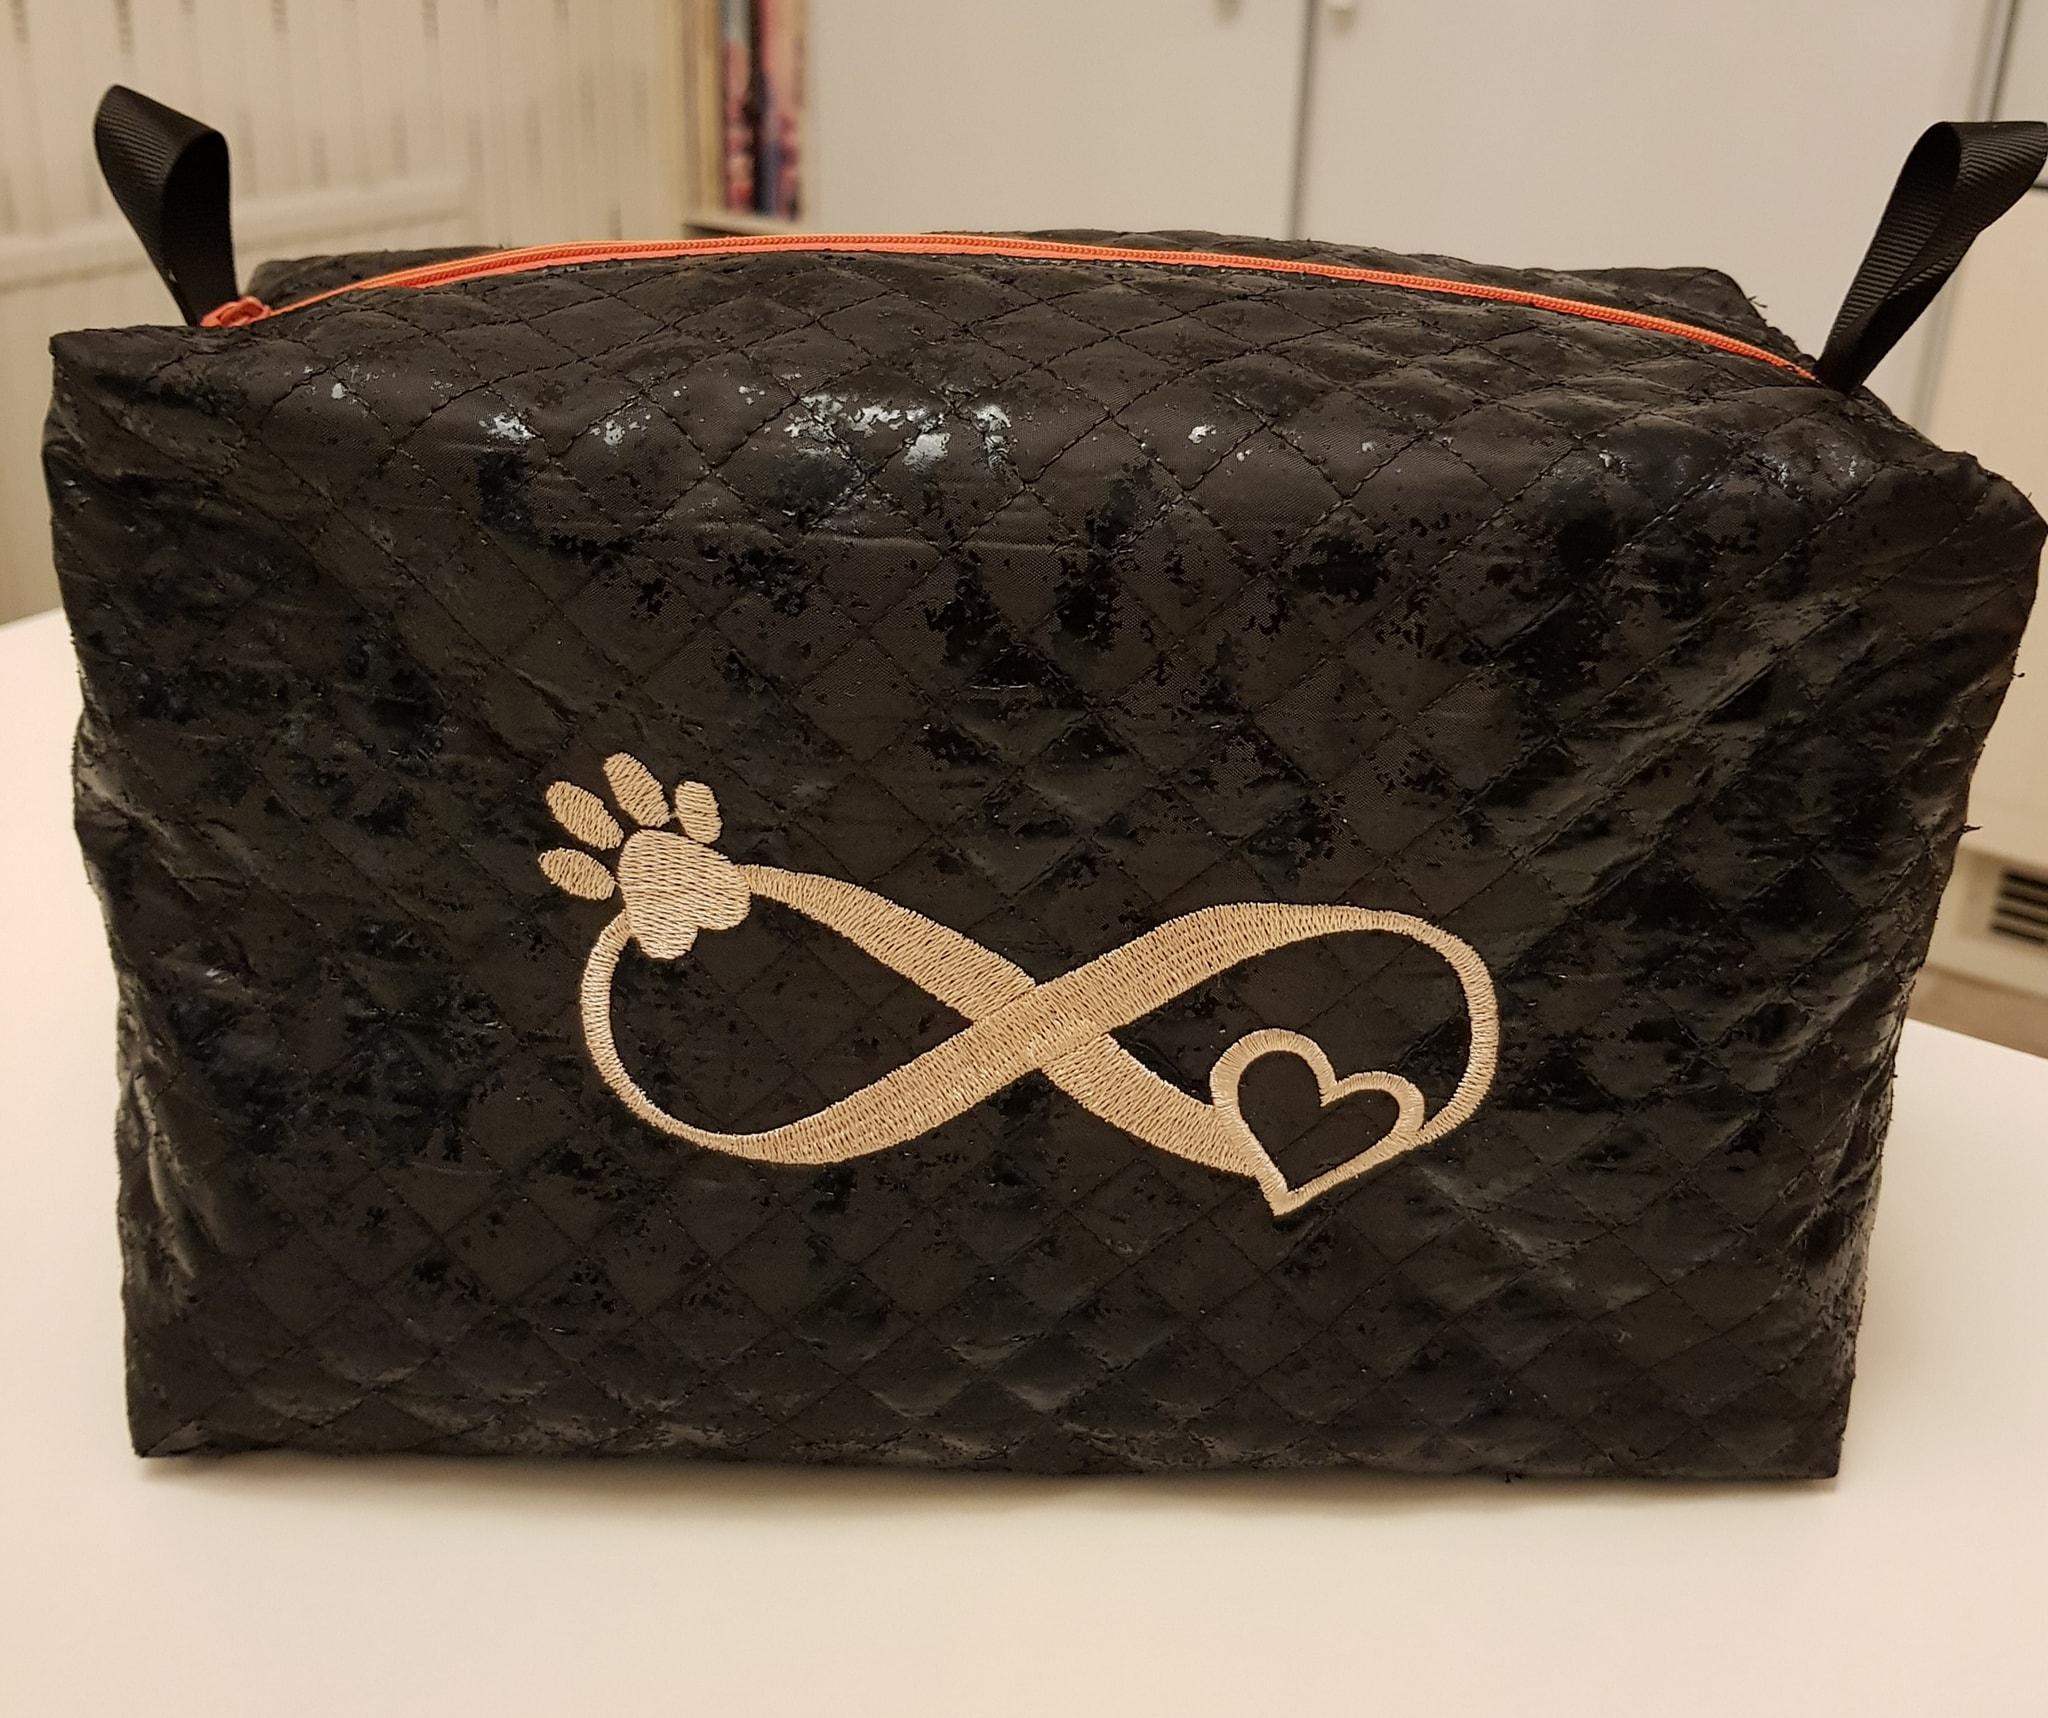 Embroidered bag with Paw free design